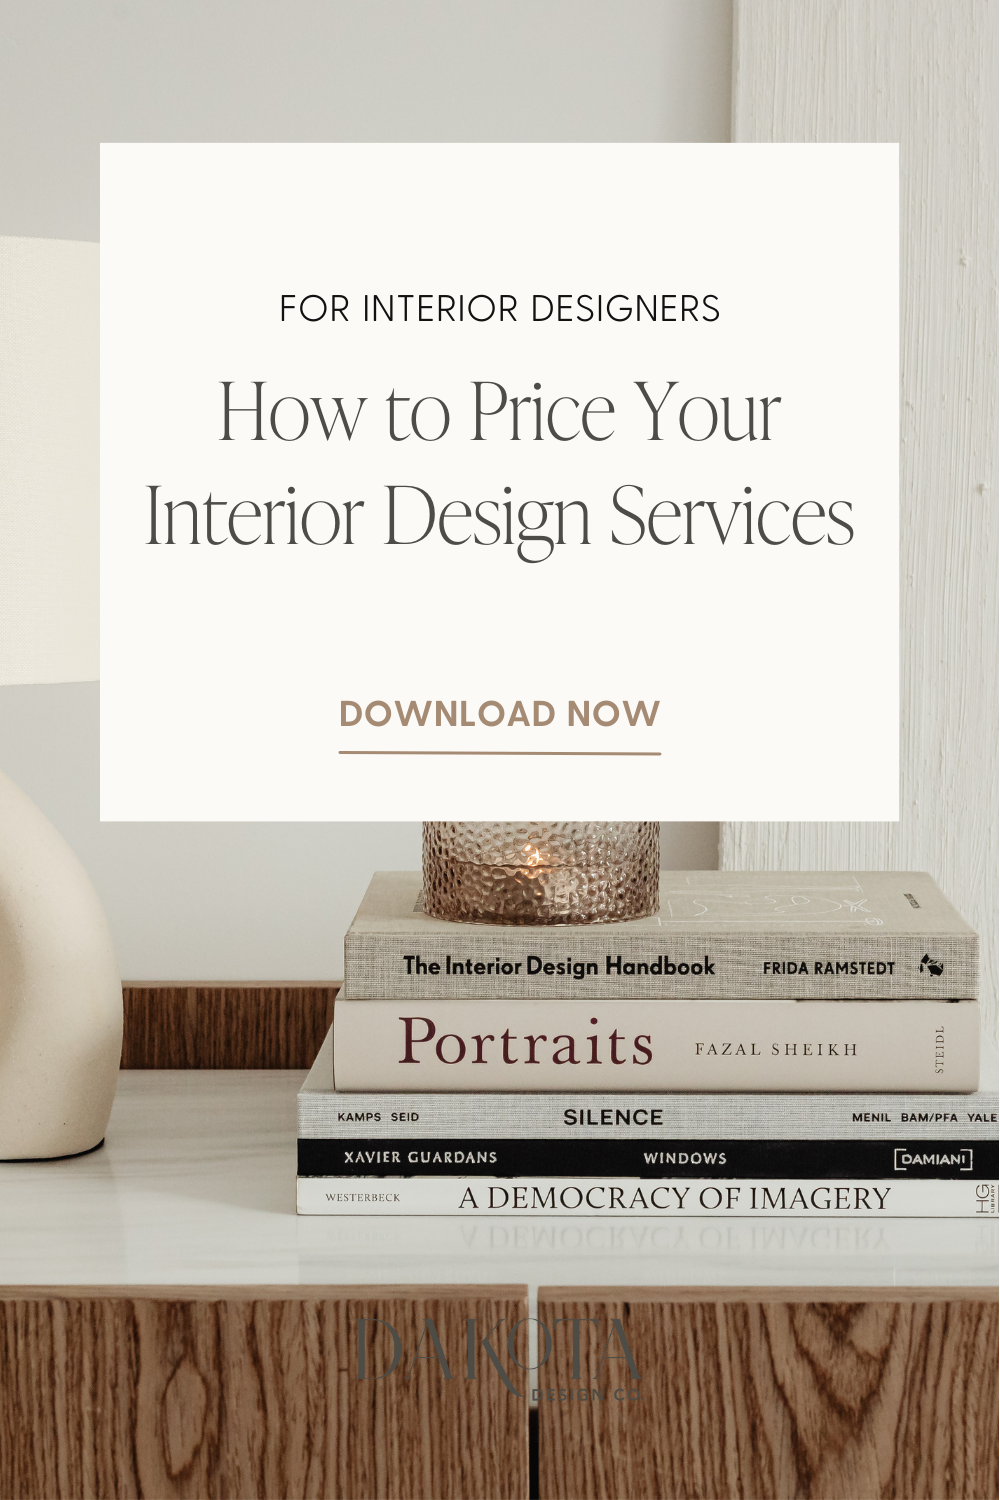 Business Resources and Education for Interior Designers